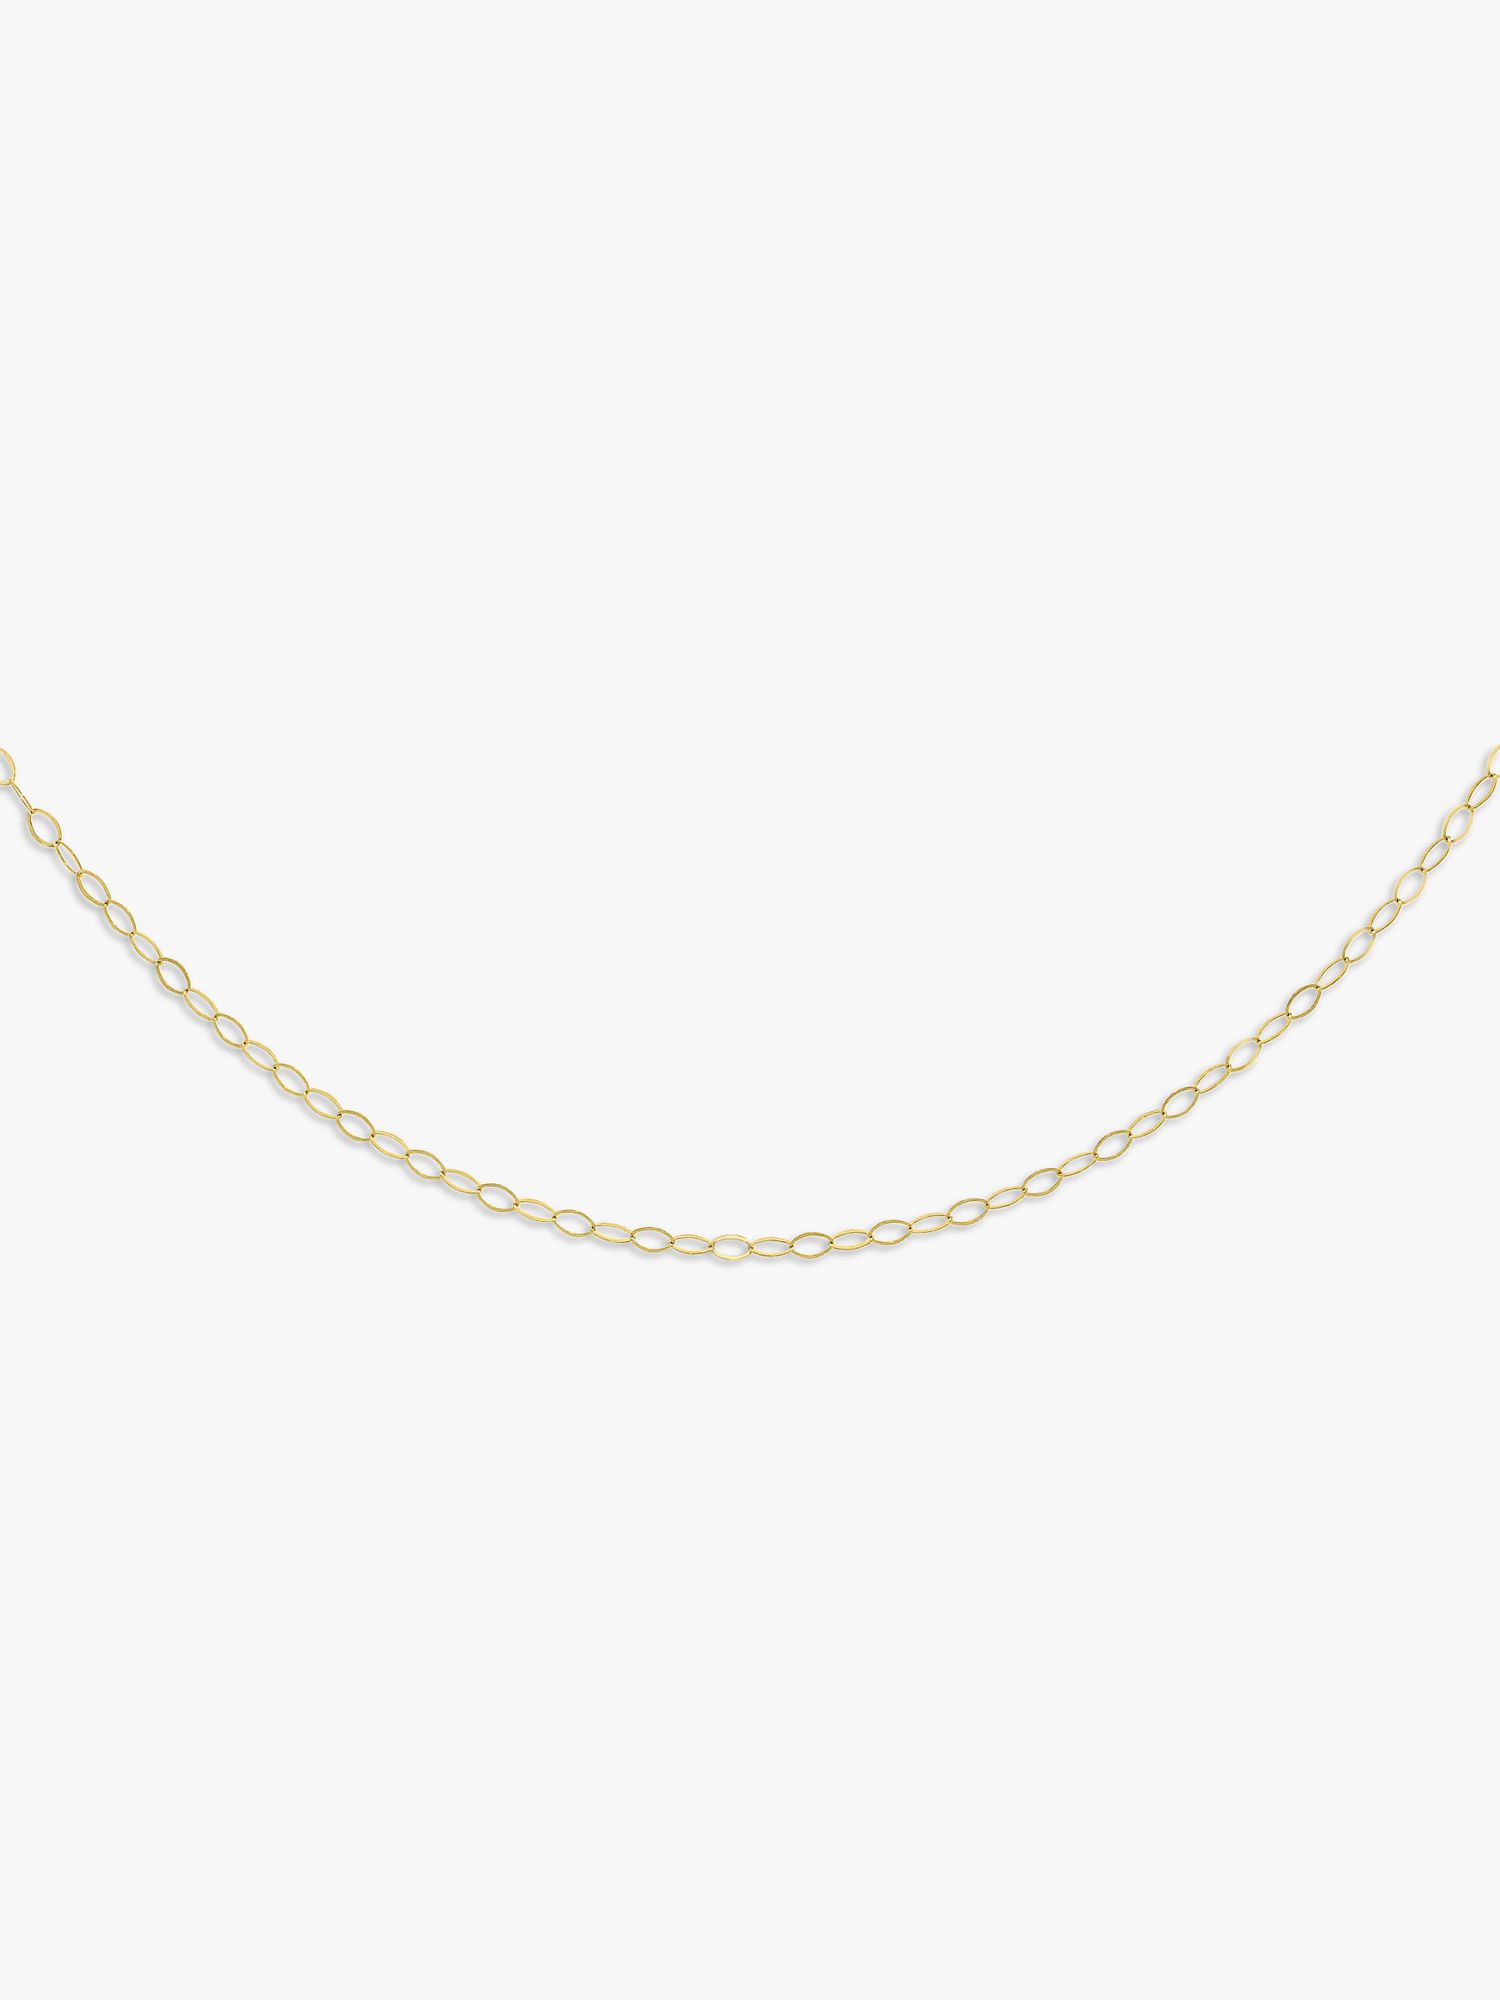 IBB 9ct Yellow Gold Long Loose Link Chain Necklace, Gold